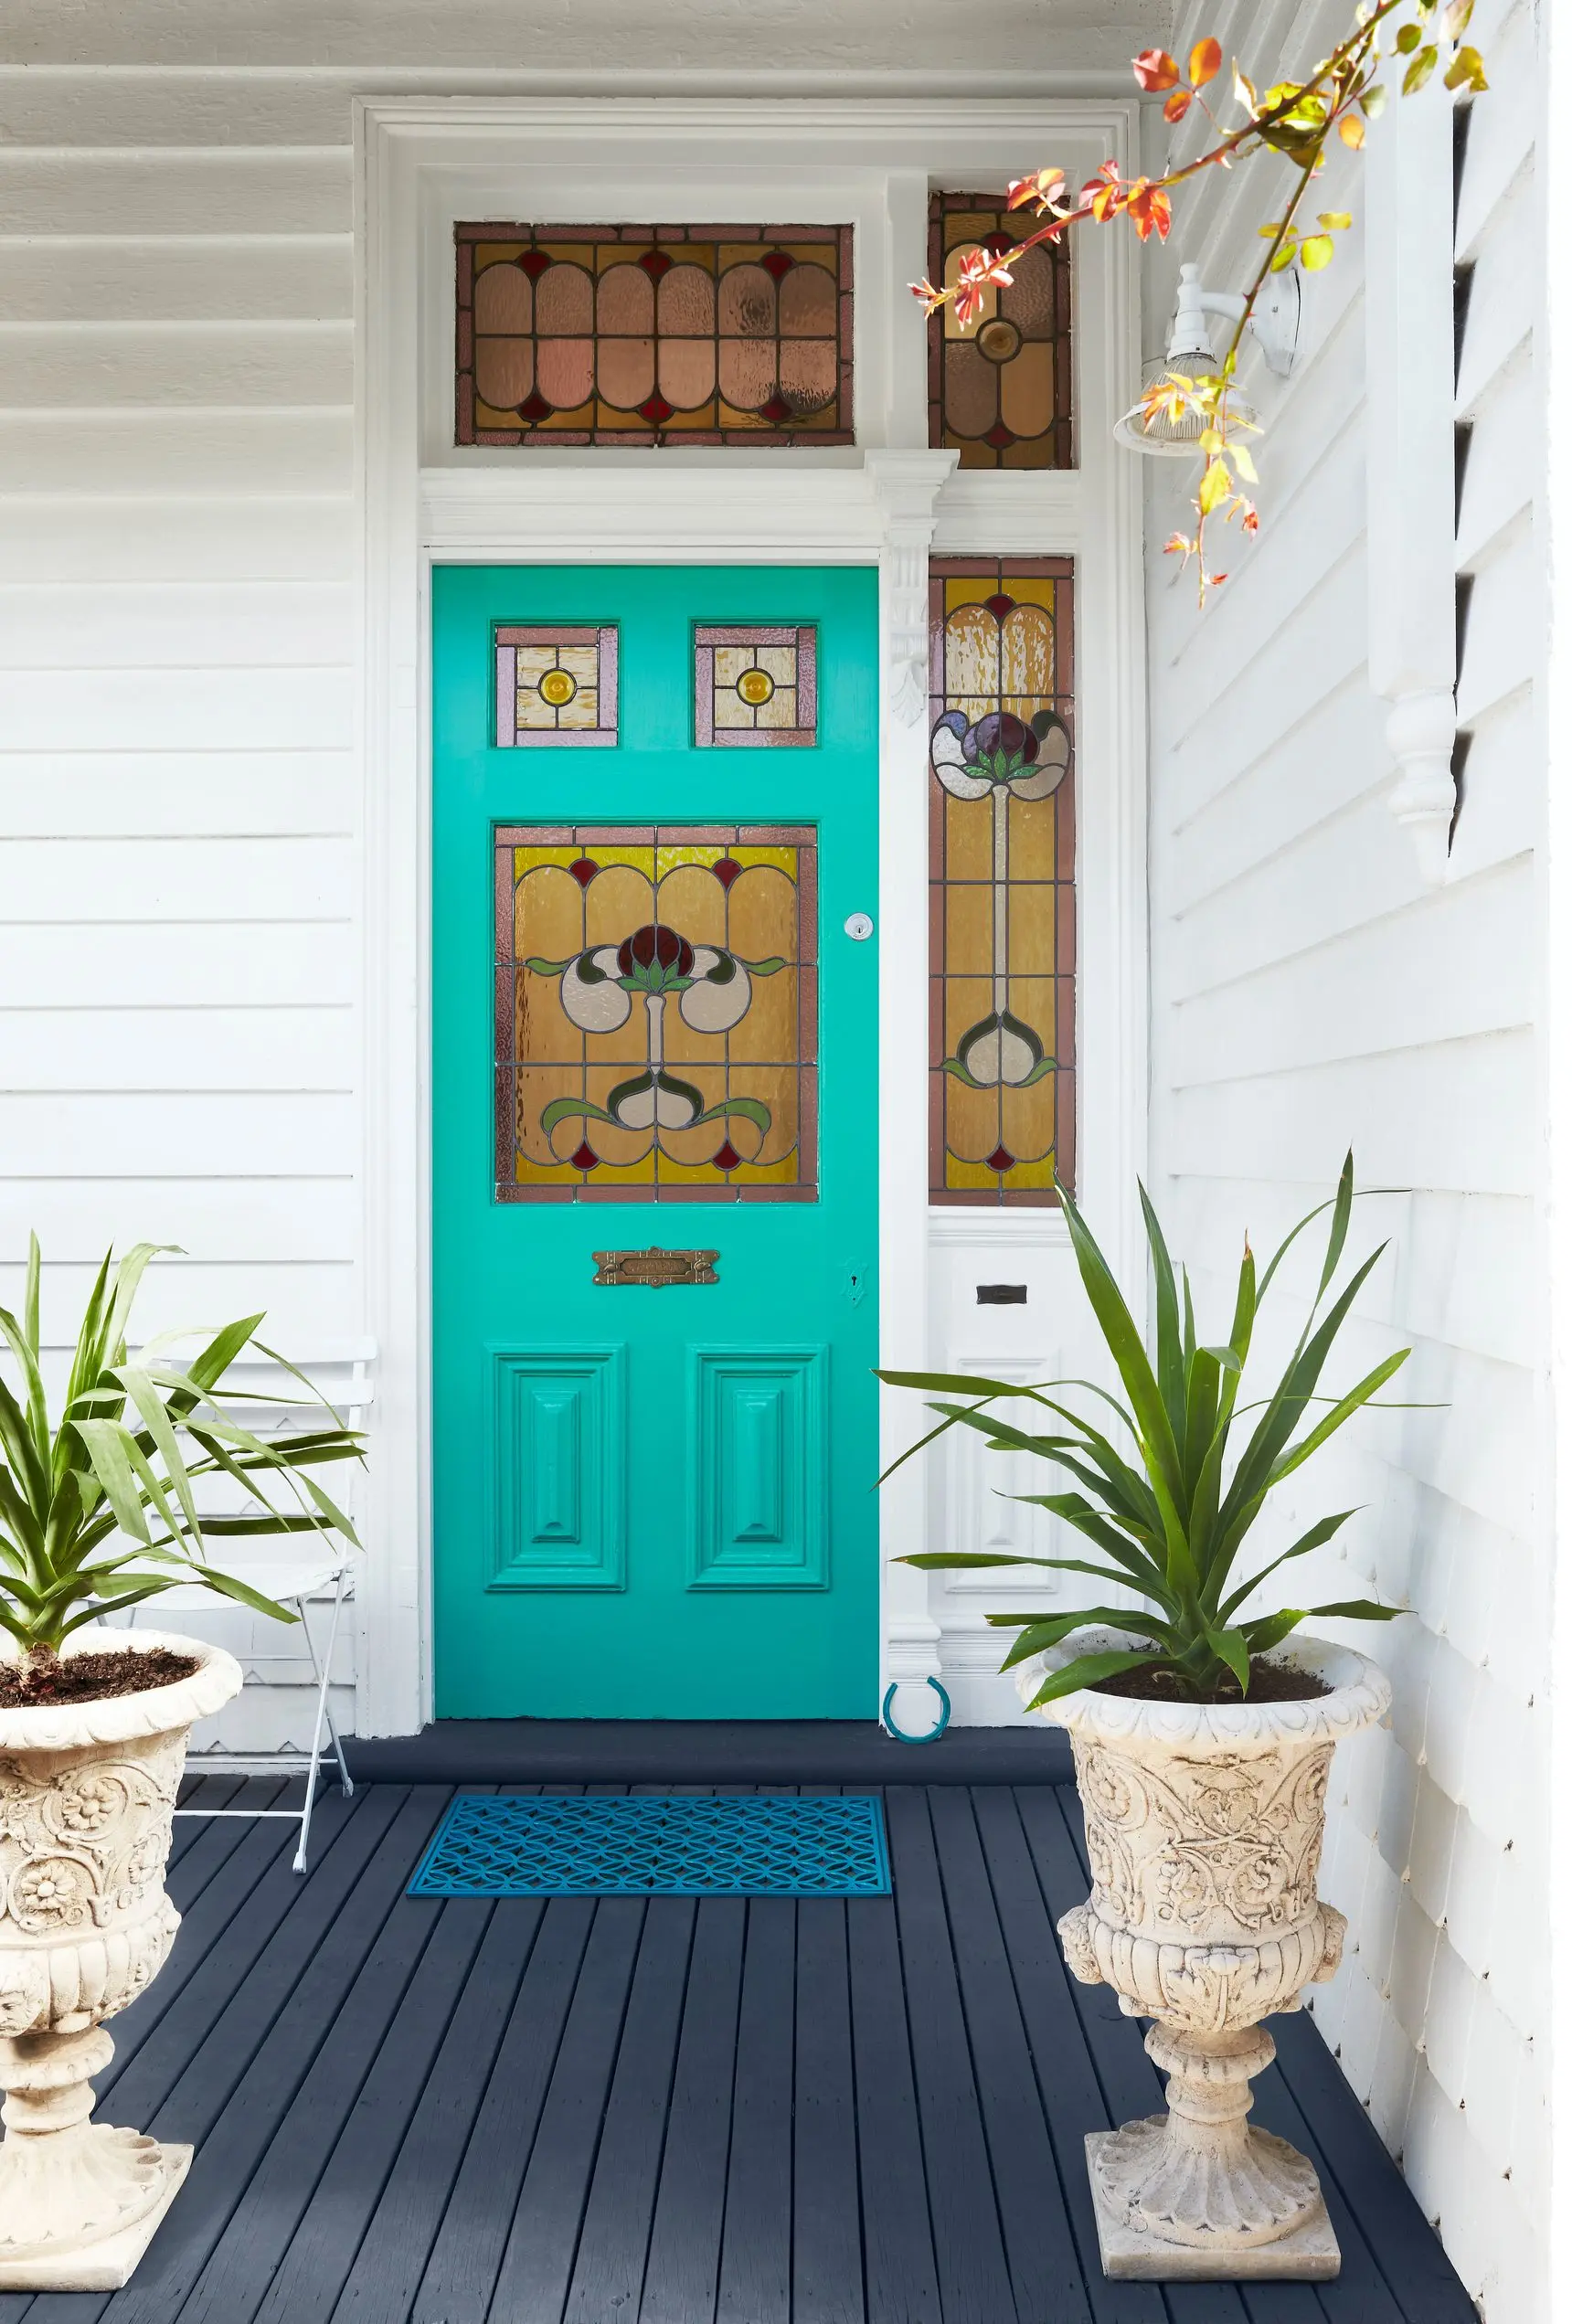 White weatherboard, teal front door, stained glass side windows and door insets